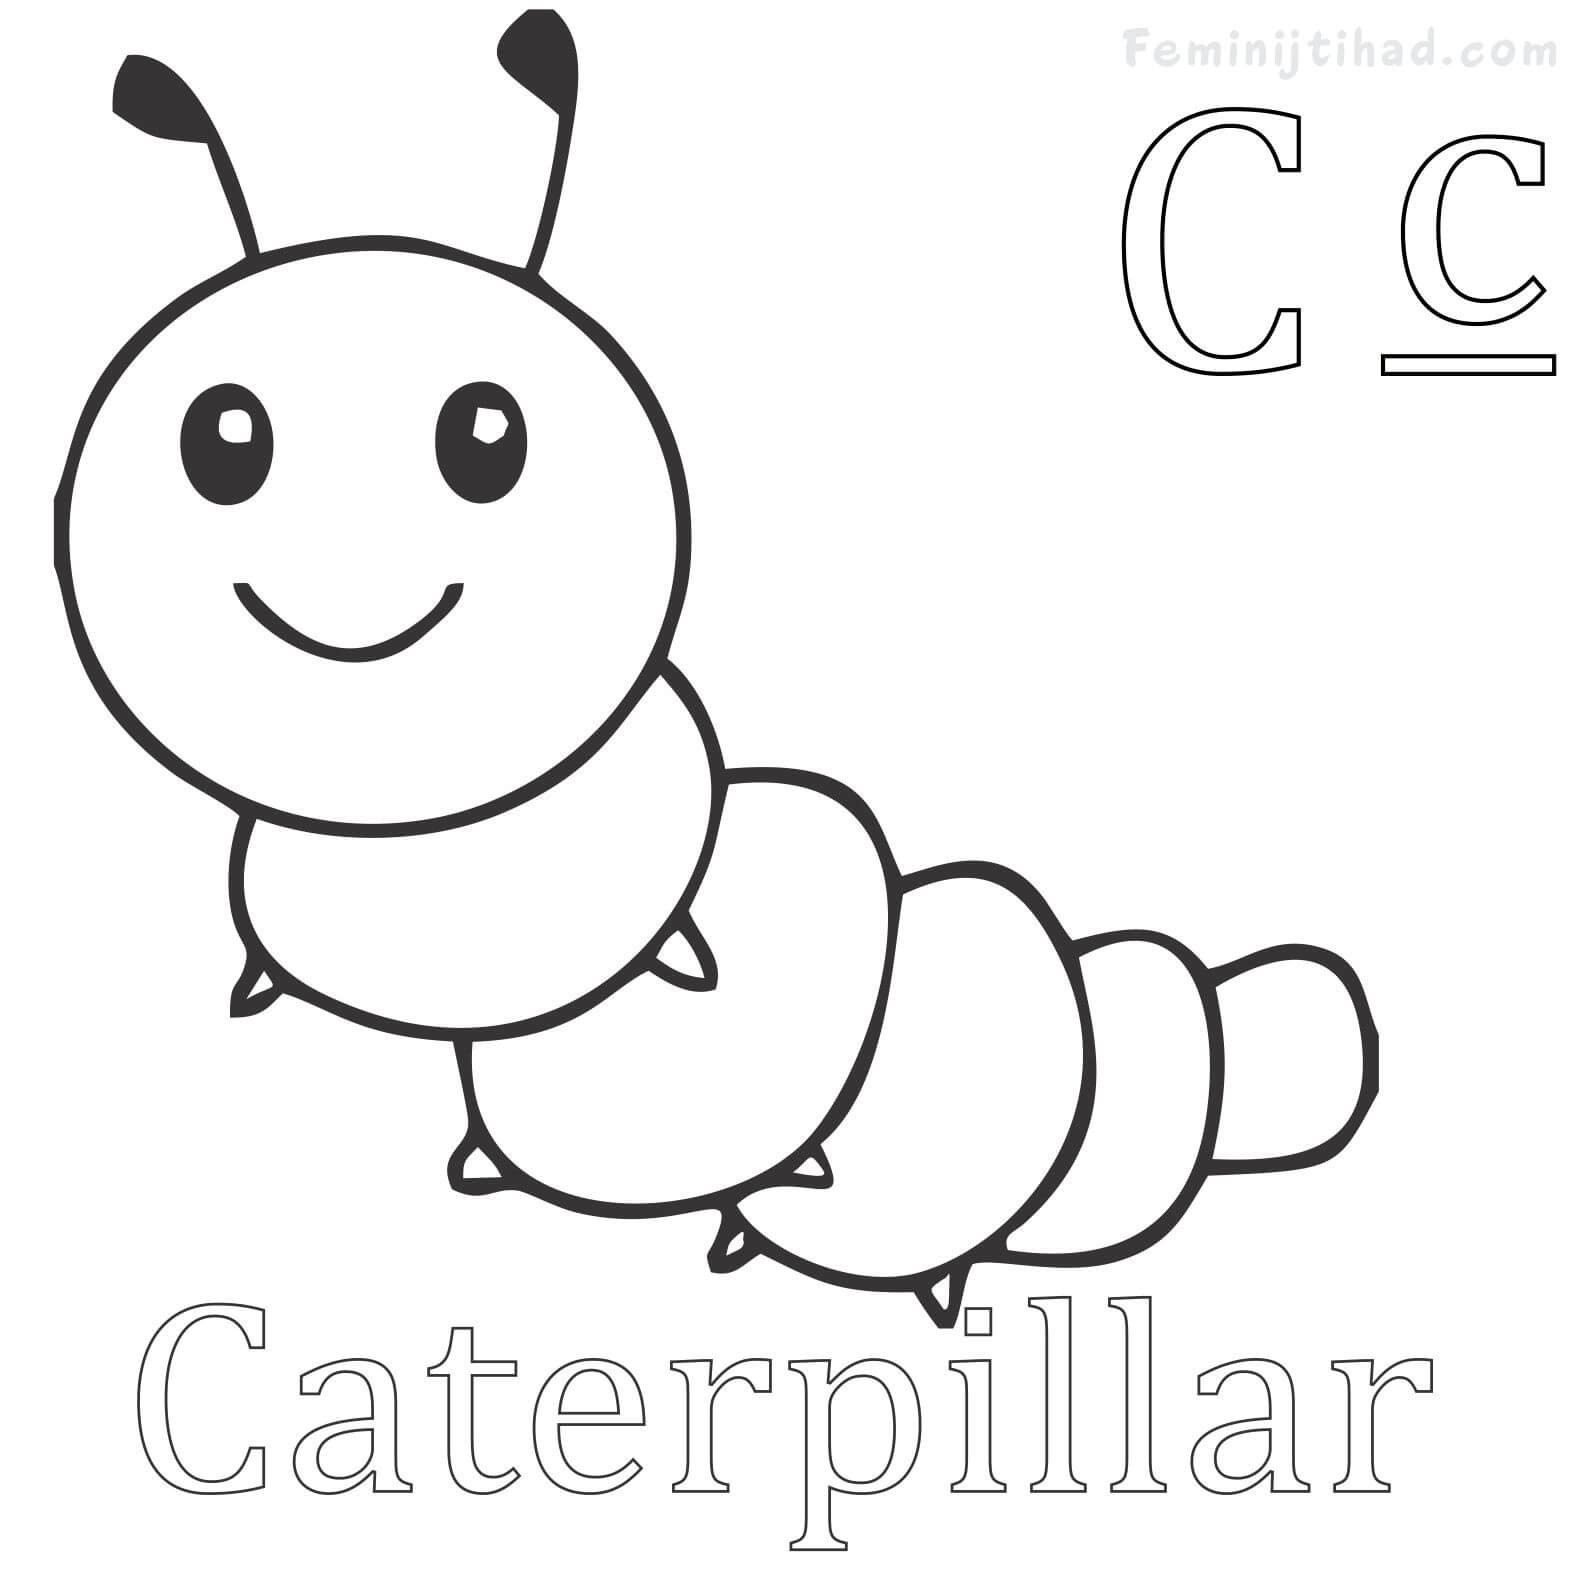 Caterpillar Coloring Pages
 Caterpillar Coloring Page babbleeditionfo